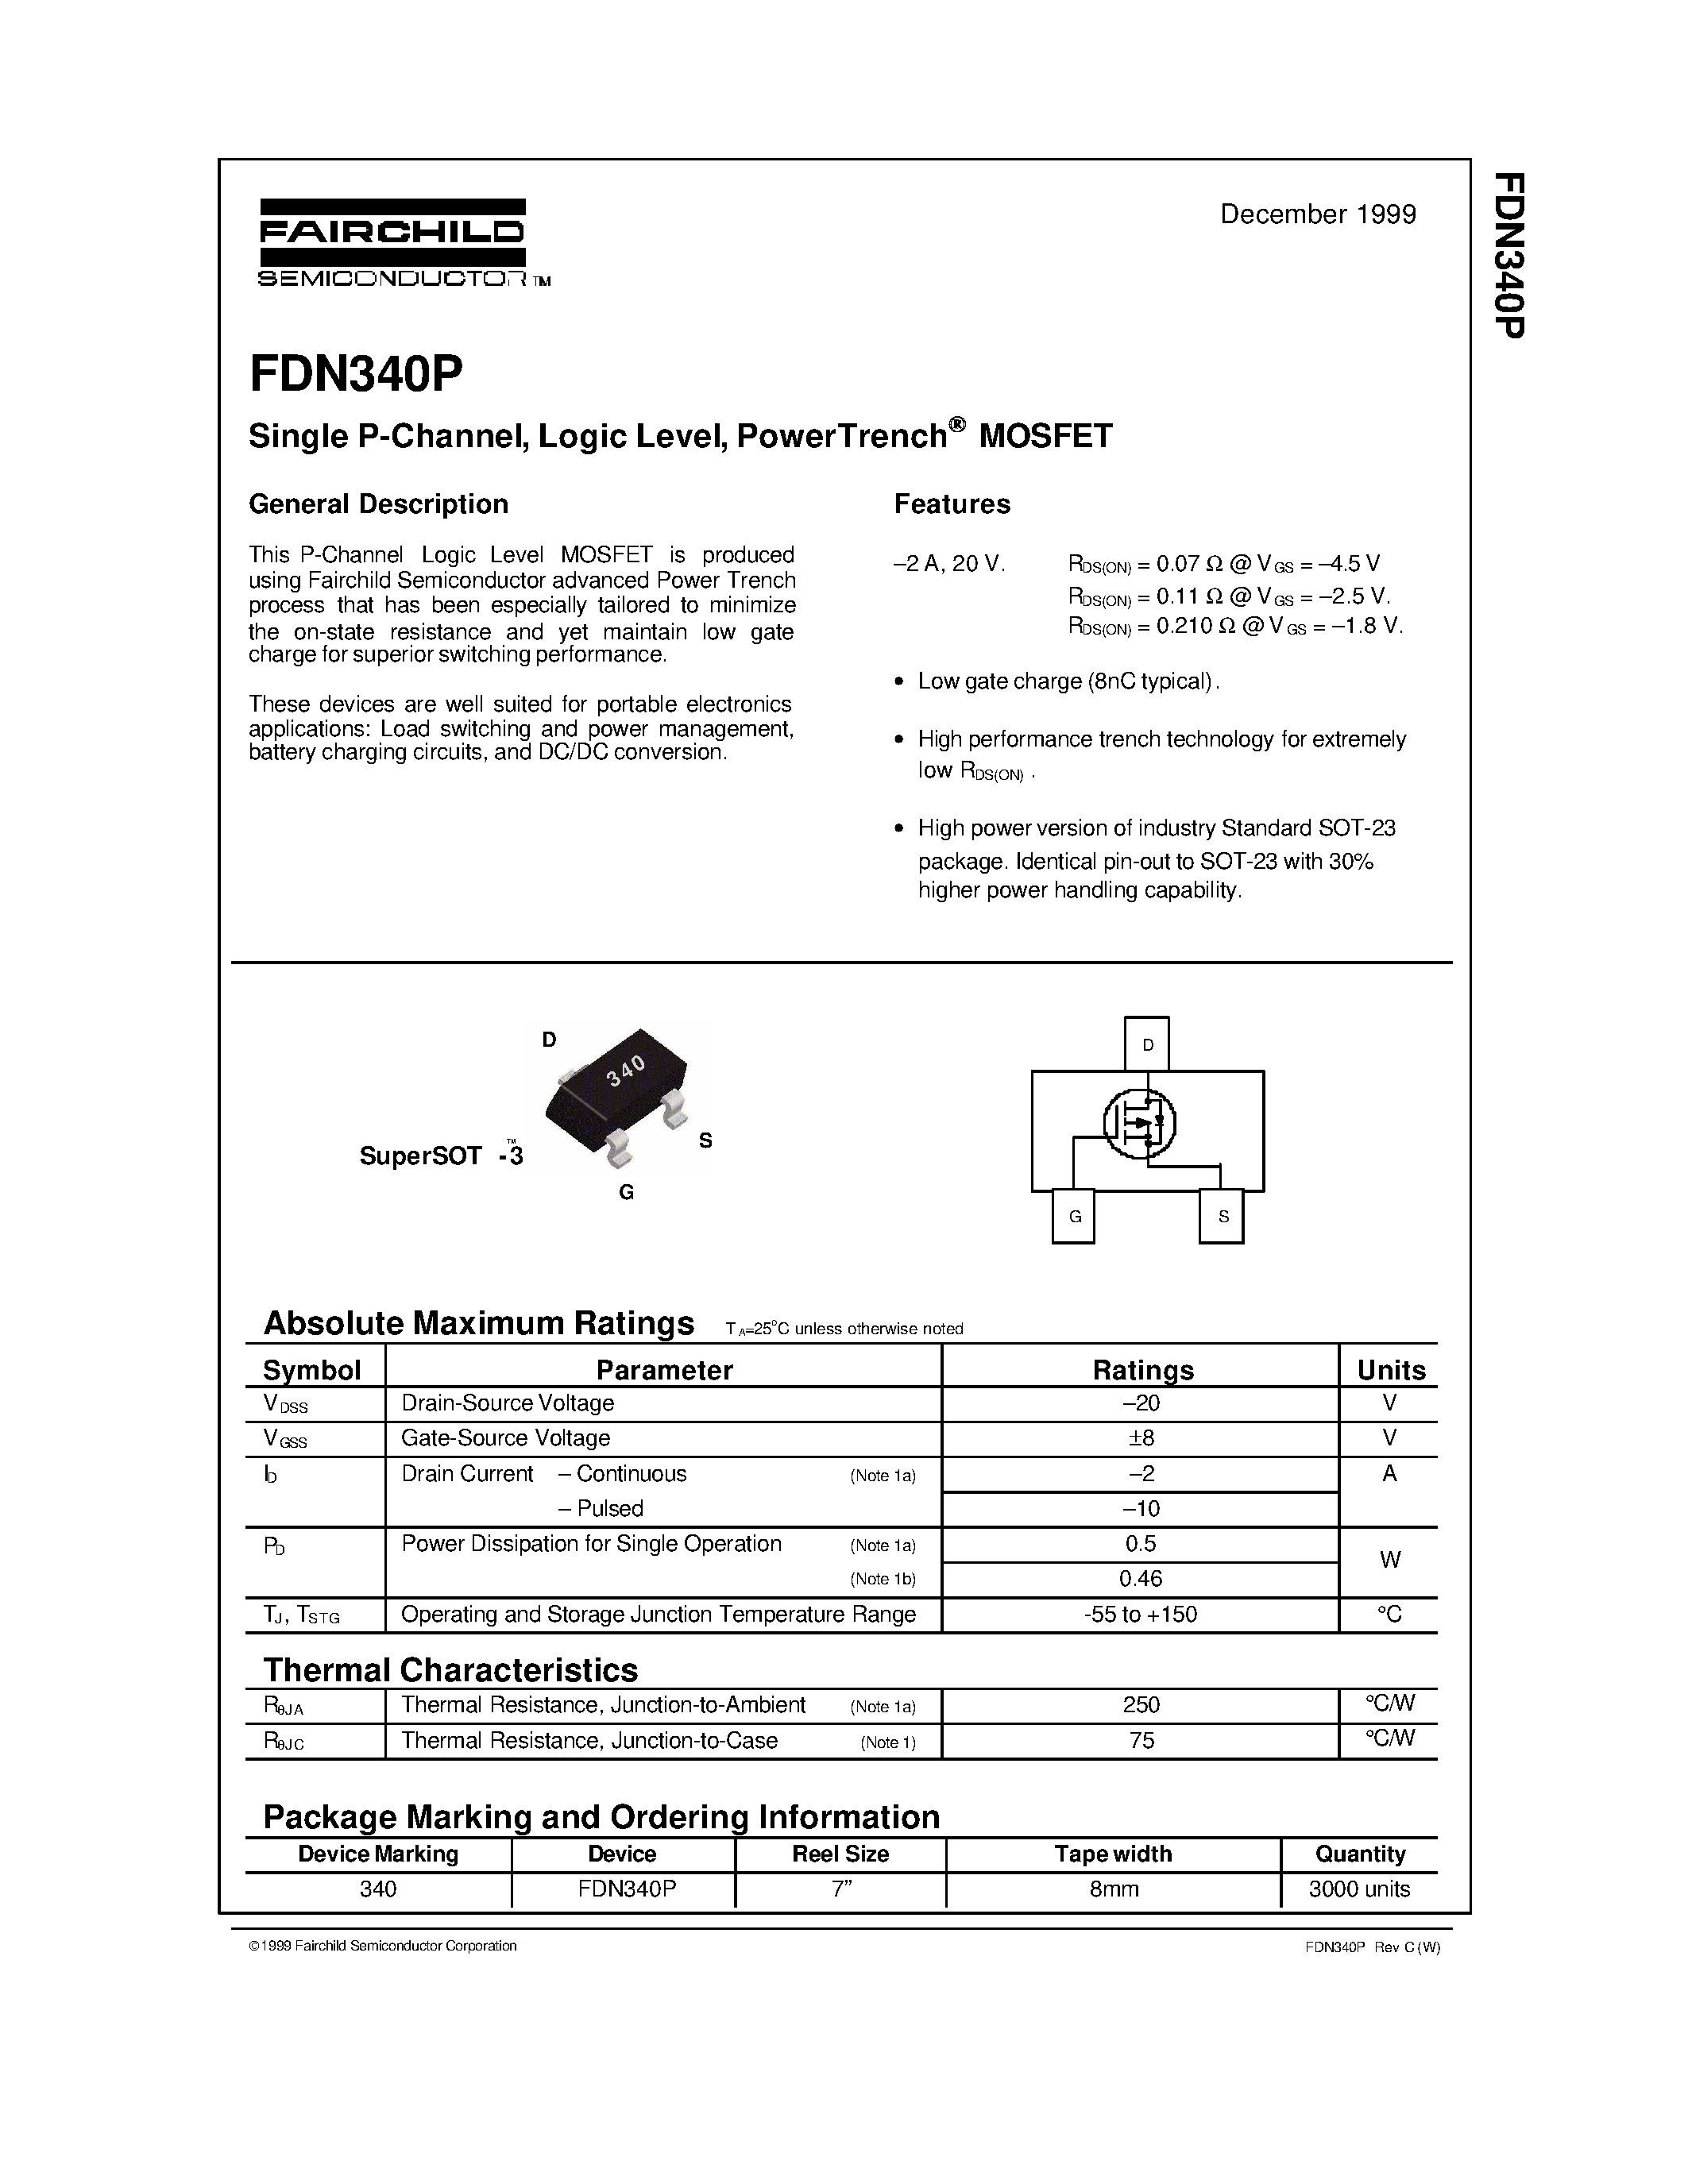 Даташит FDN340P - Single P-Channel/ Logic Level/ PowerTrench MOSFET страница 1